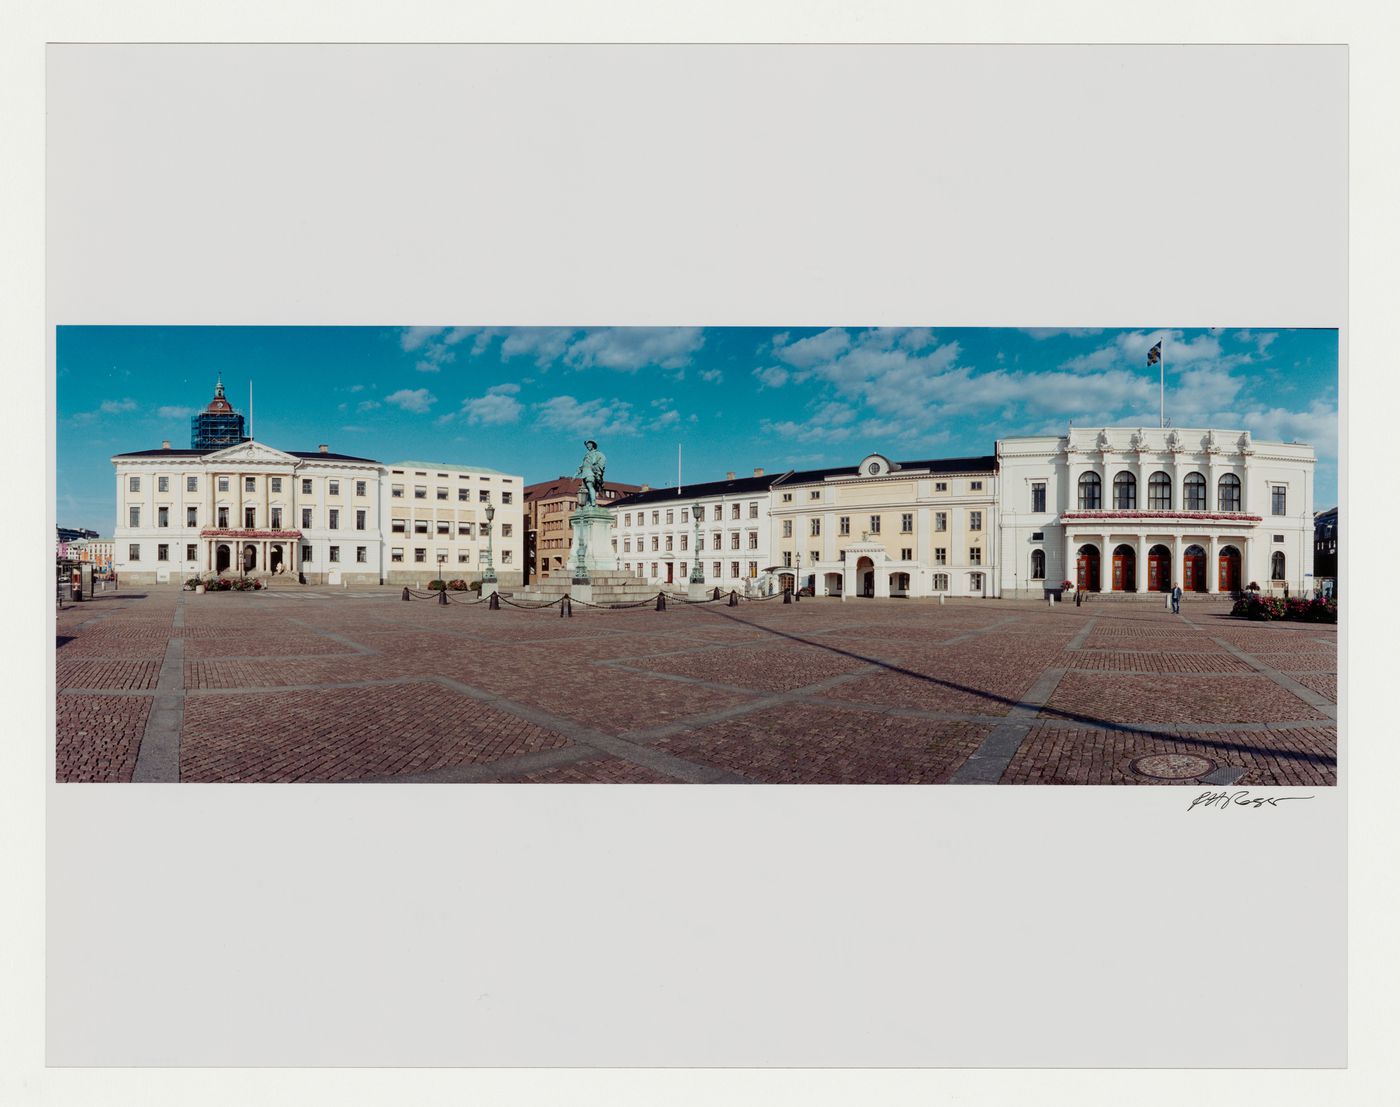 Panoramic view of Gustav Adolf Square with Göteborgs rådhusets tillbyggnad [courthouse annex] on the left and unidentified buildings on the right, Göteborg, Sweden